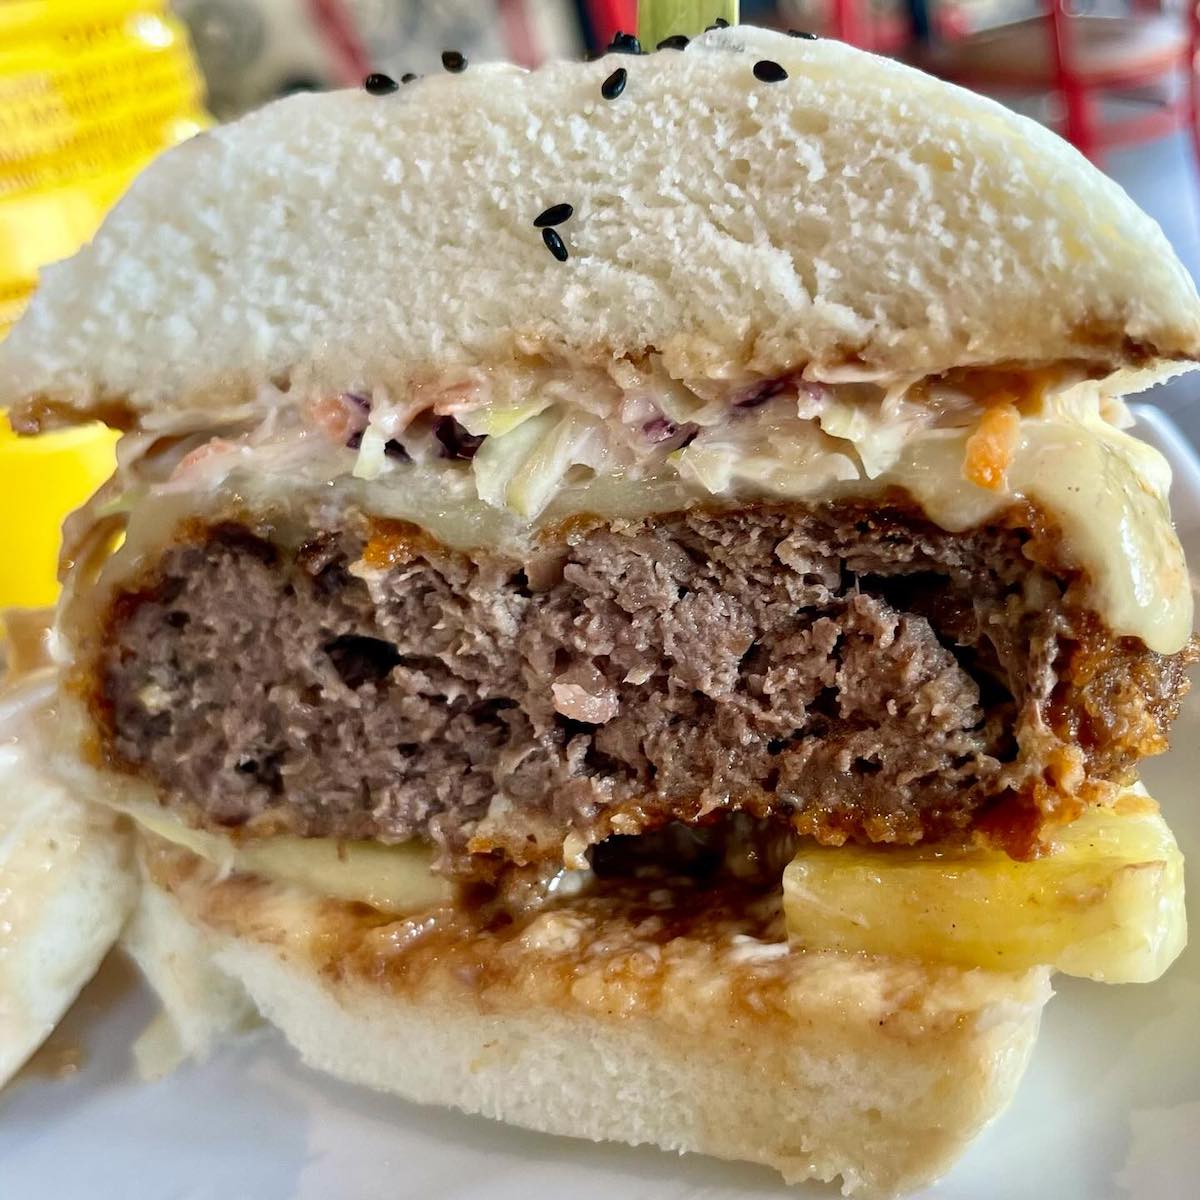 The Katsu Burger from Temple Street Eatery in Fort Lauderdale, Florida